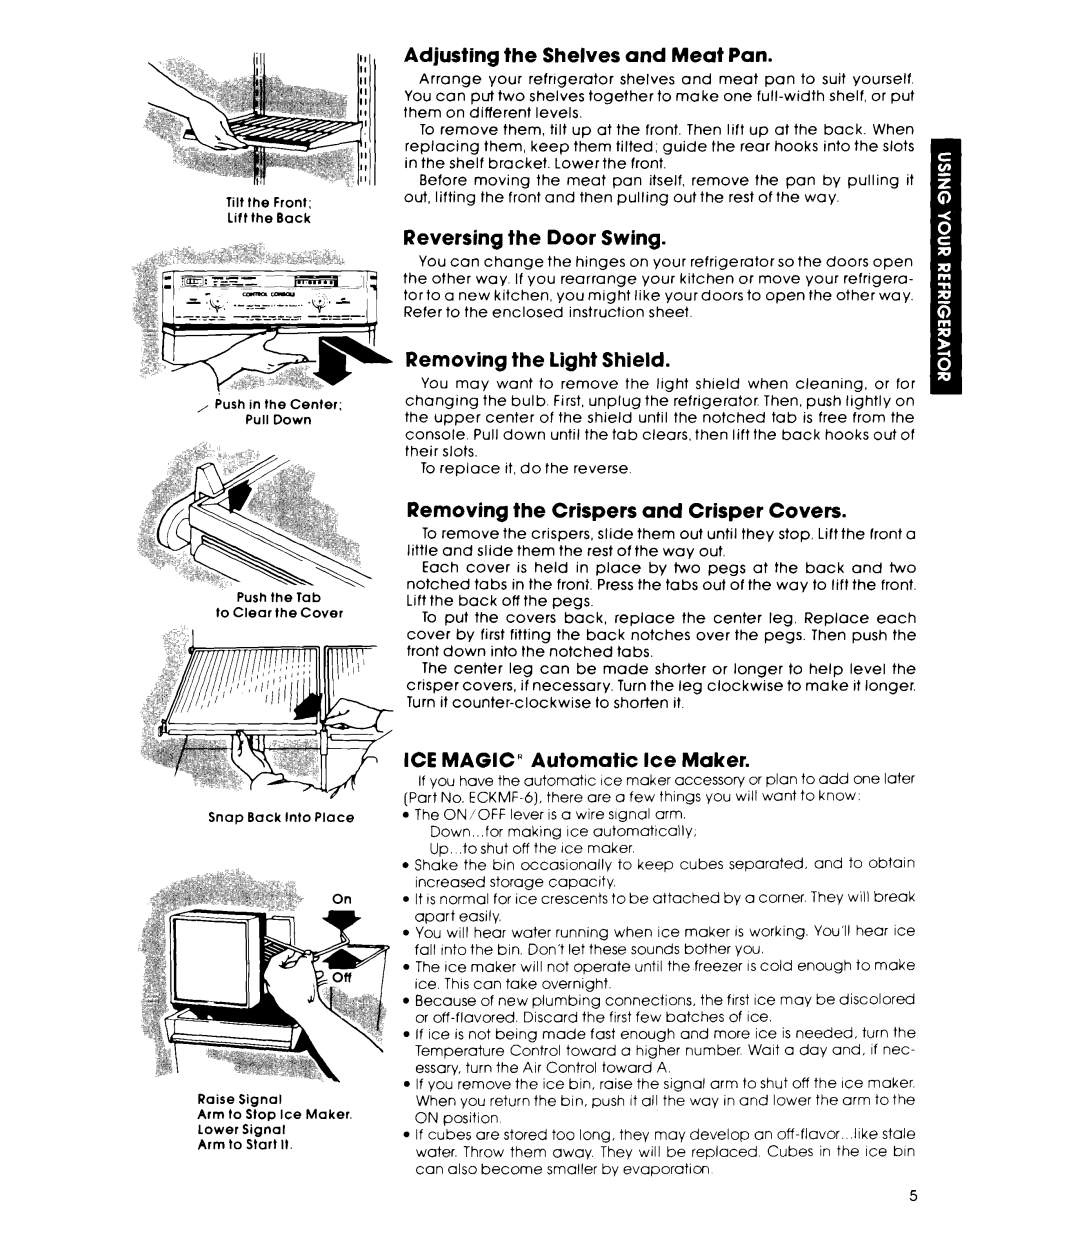 Whirlpool ET16AKXL Adjusting the Shelves and Meat Pan, Reversing the Door Swing, Removing, Shield, Crispers, Covers, light 